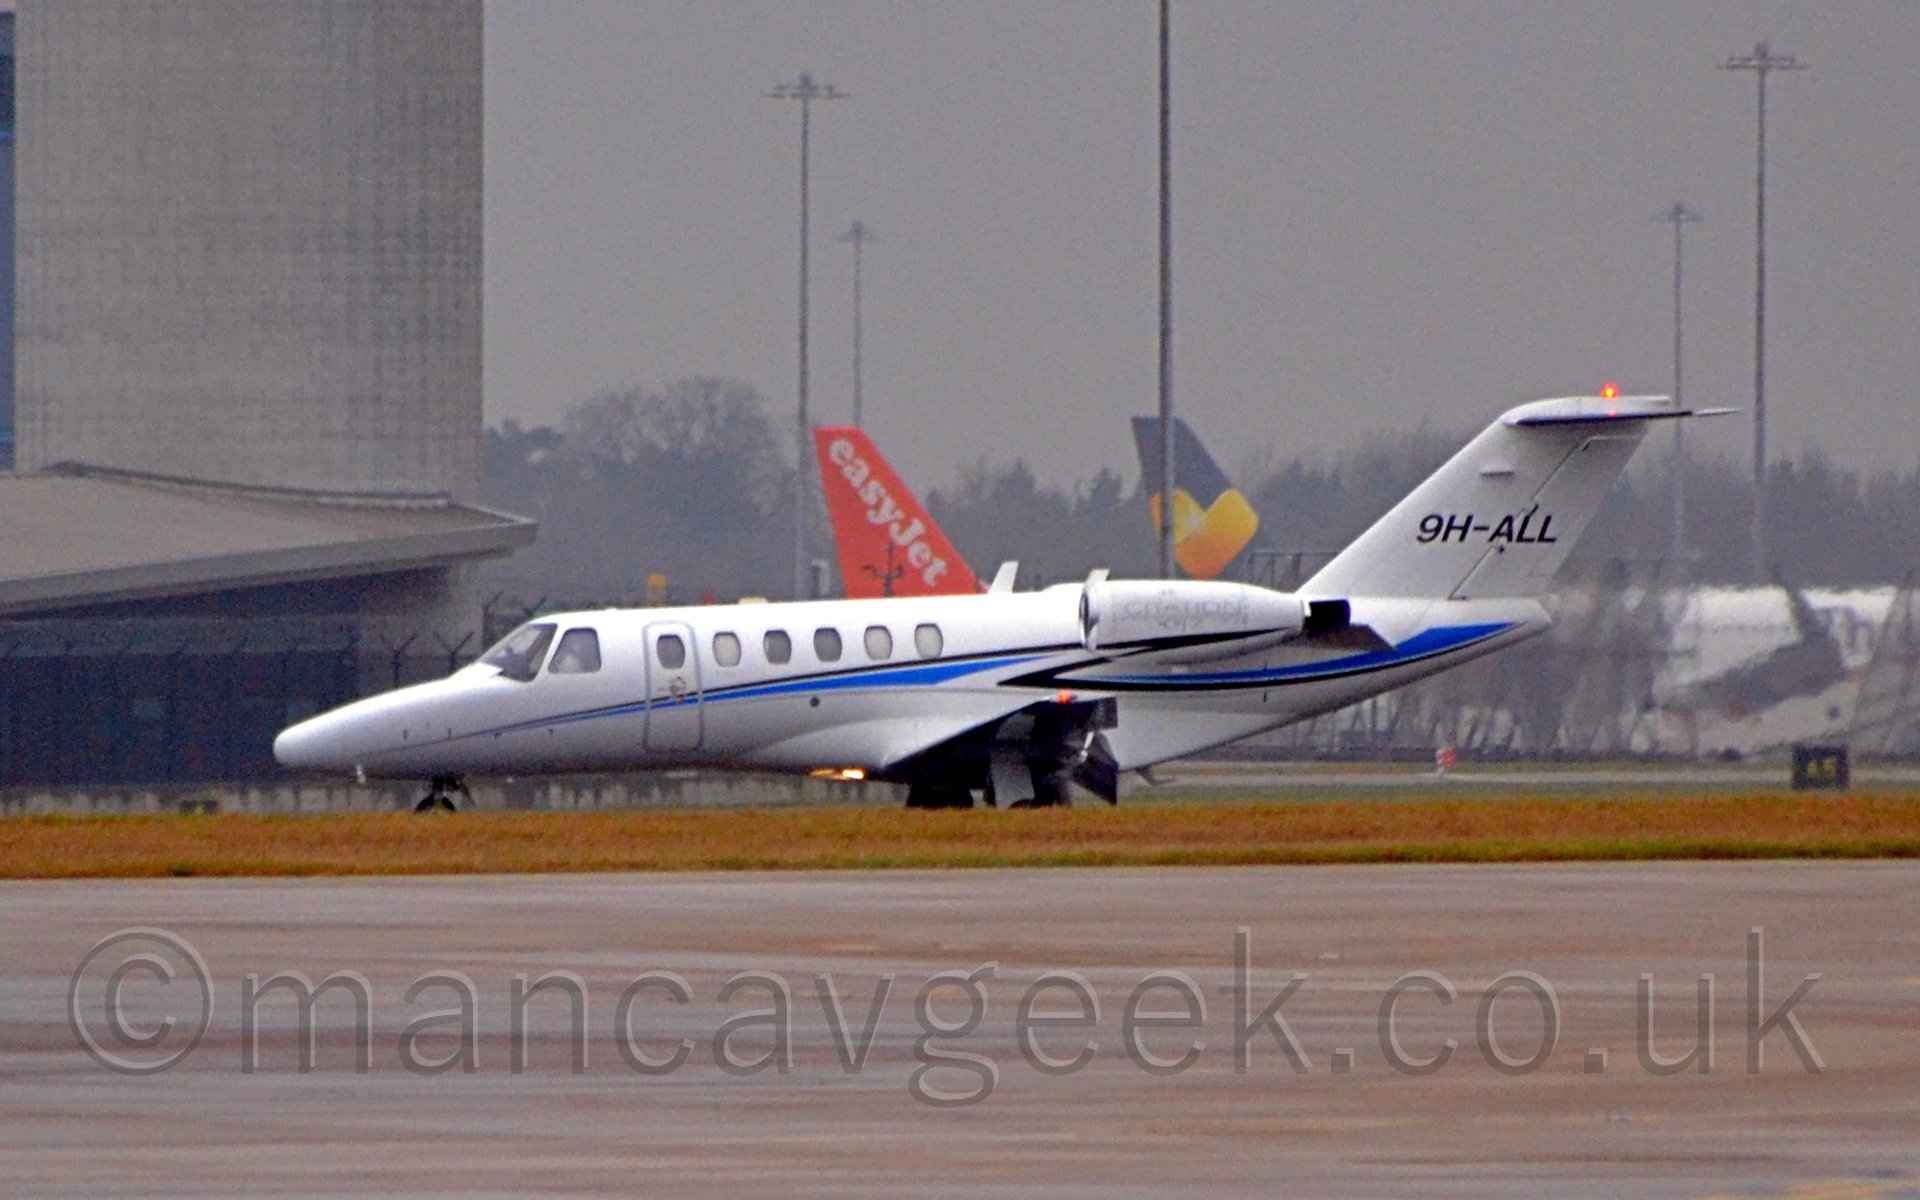 Side view of a twin engined bizjet moving from right to left after landing on a runway. The plane is mostly white, with a blue and black stripe running along the fuselage and under the engines. The registration "9H-ALL" is displayed prominently on the tail, with additional grey "CITATION" titles on the engine pods. The flaps are deployed from behind the wings. In the foreground, a wide stretch of tarmac leads up to a gressed area, with the grass partially obscuring the planes wheels. In the background, a tall grey tower dominates the left of the frame, while orange and grey tails are visible behind this plane in the distance, with scattered lighting poles stretching into the moody grey sky.